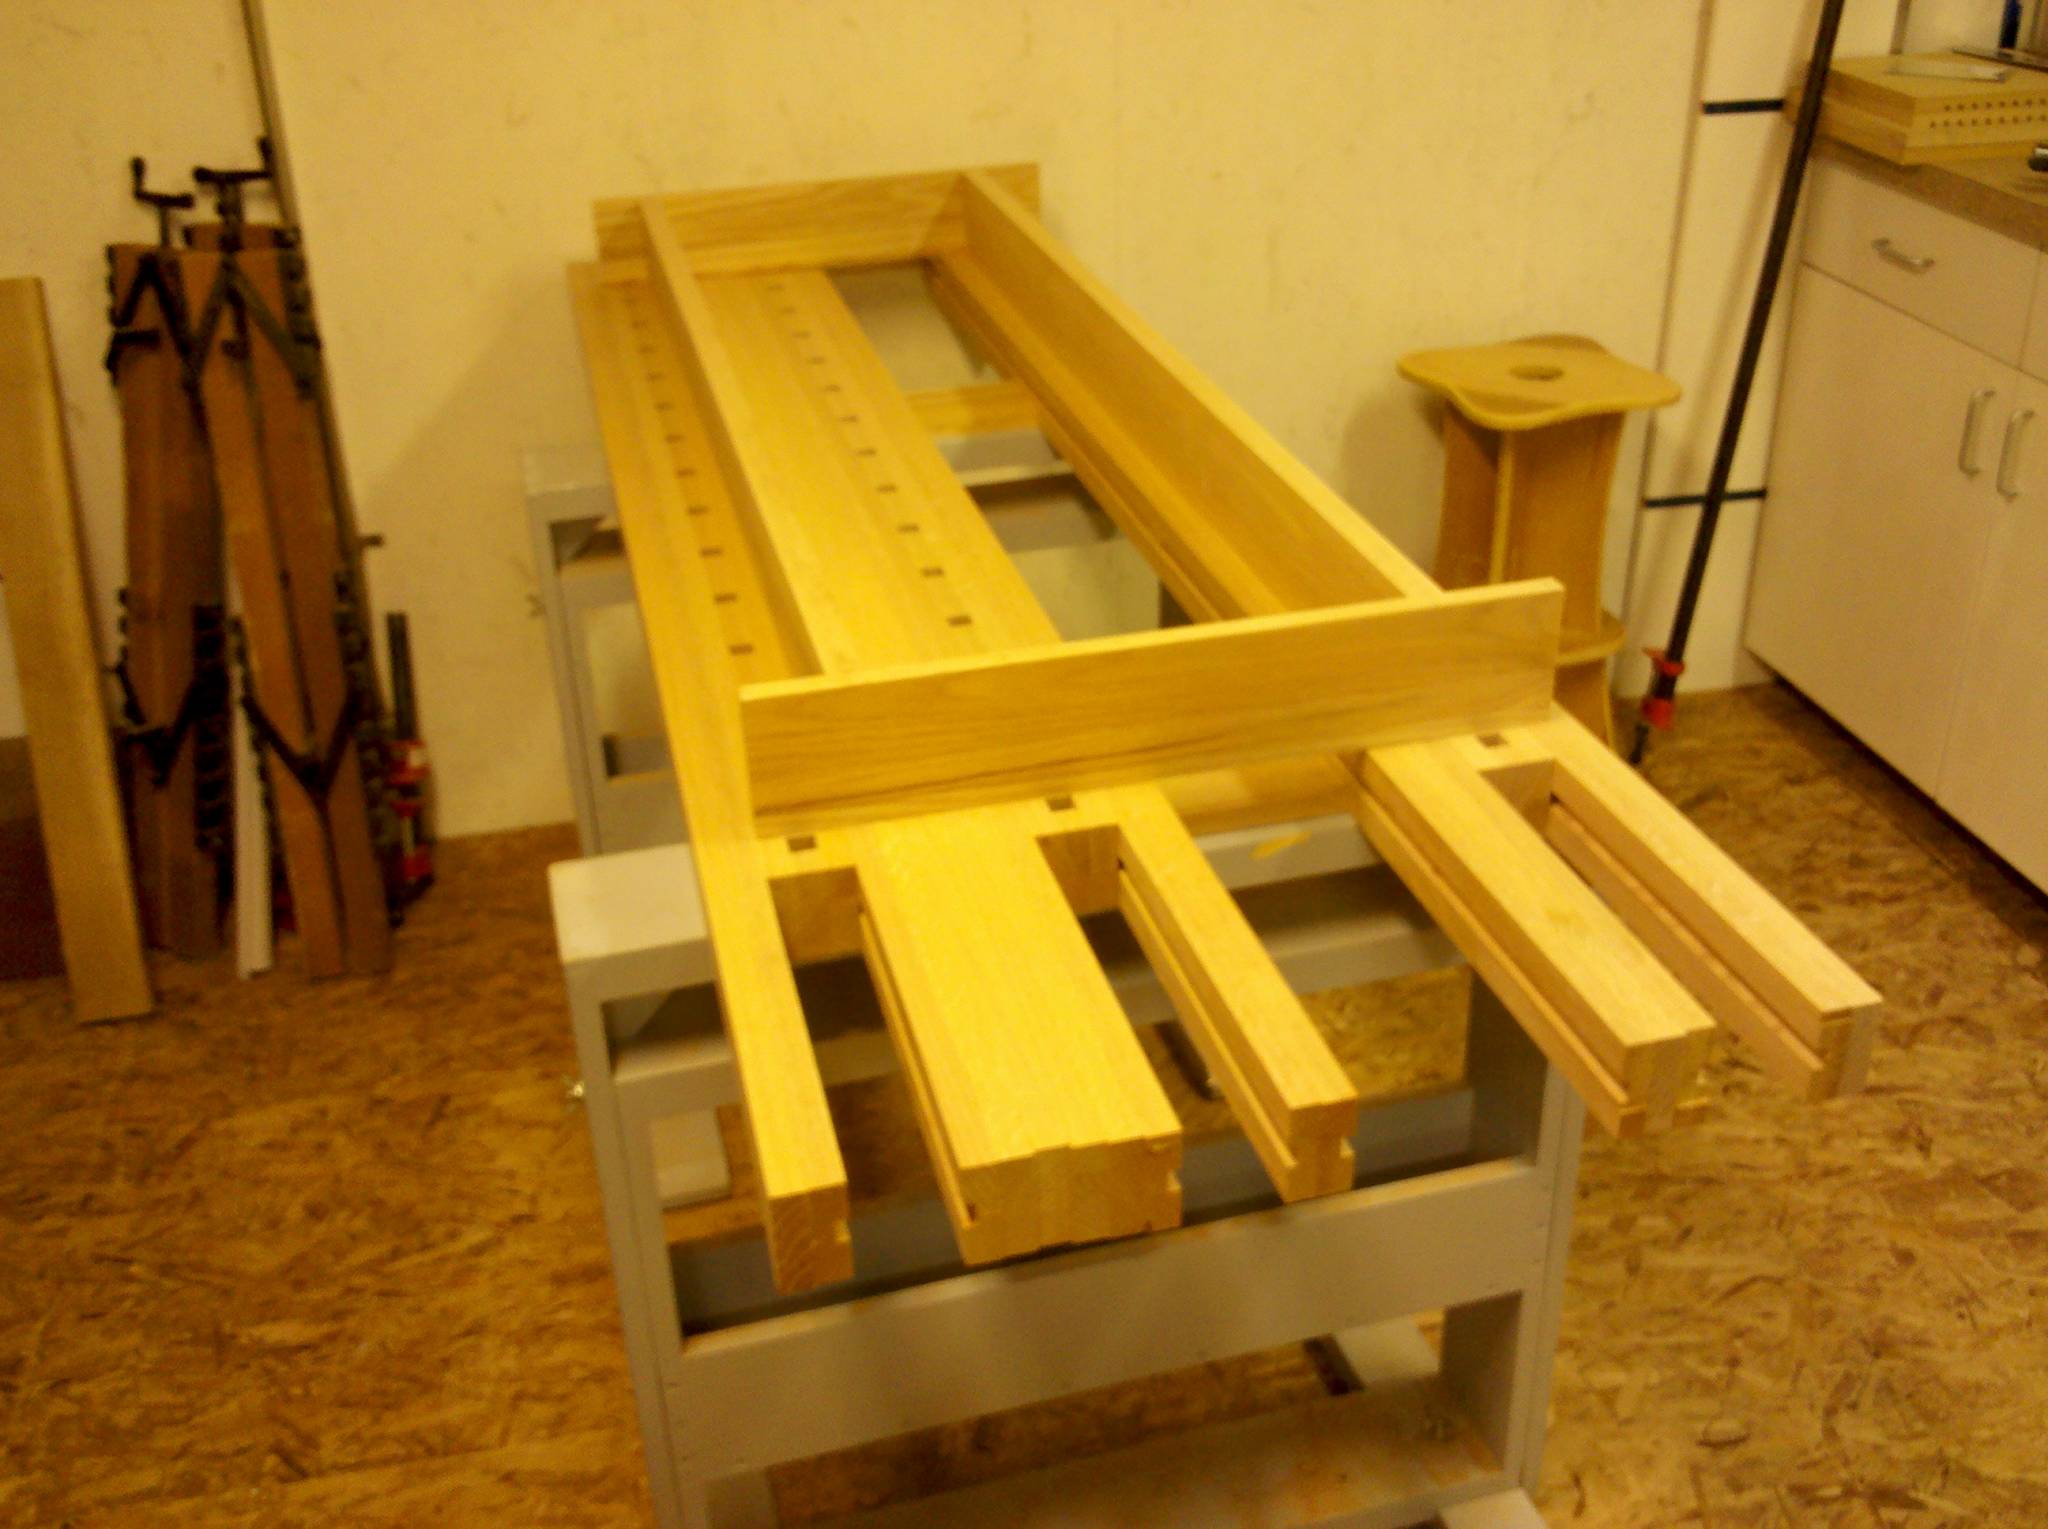 Workbench - starting on the support structure